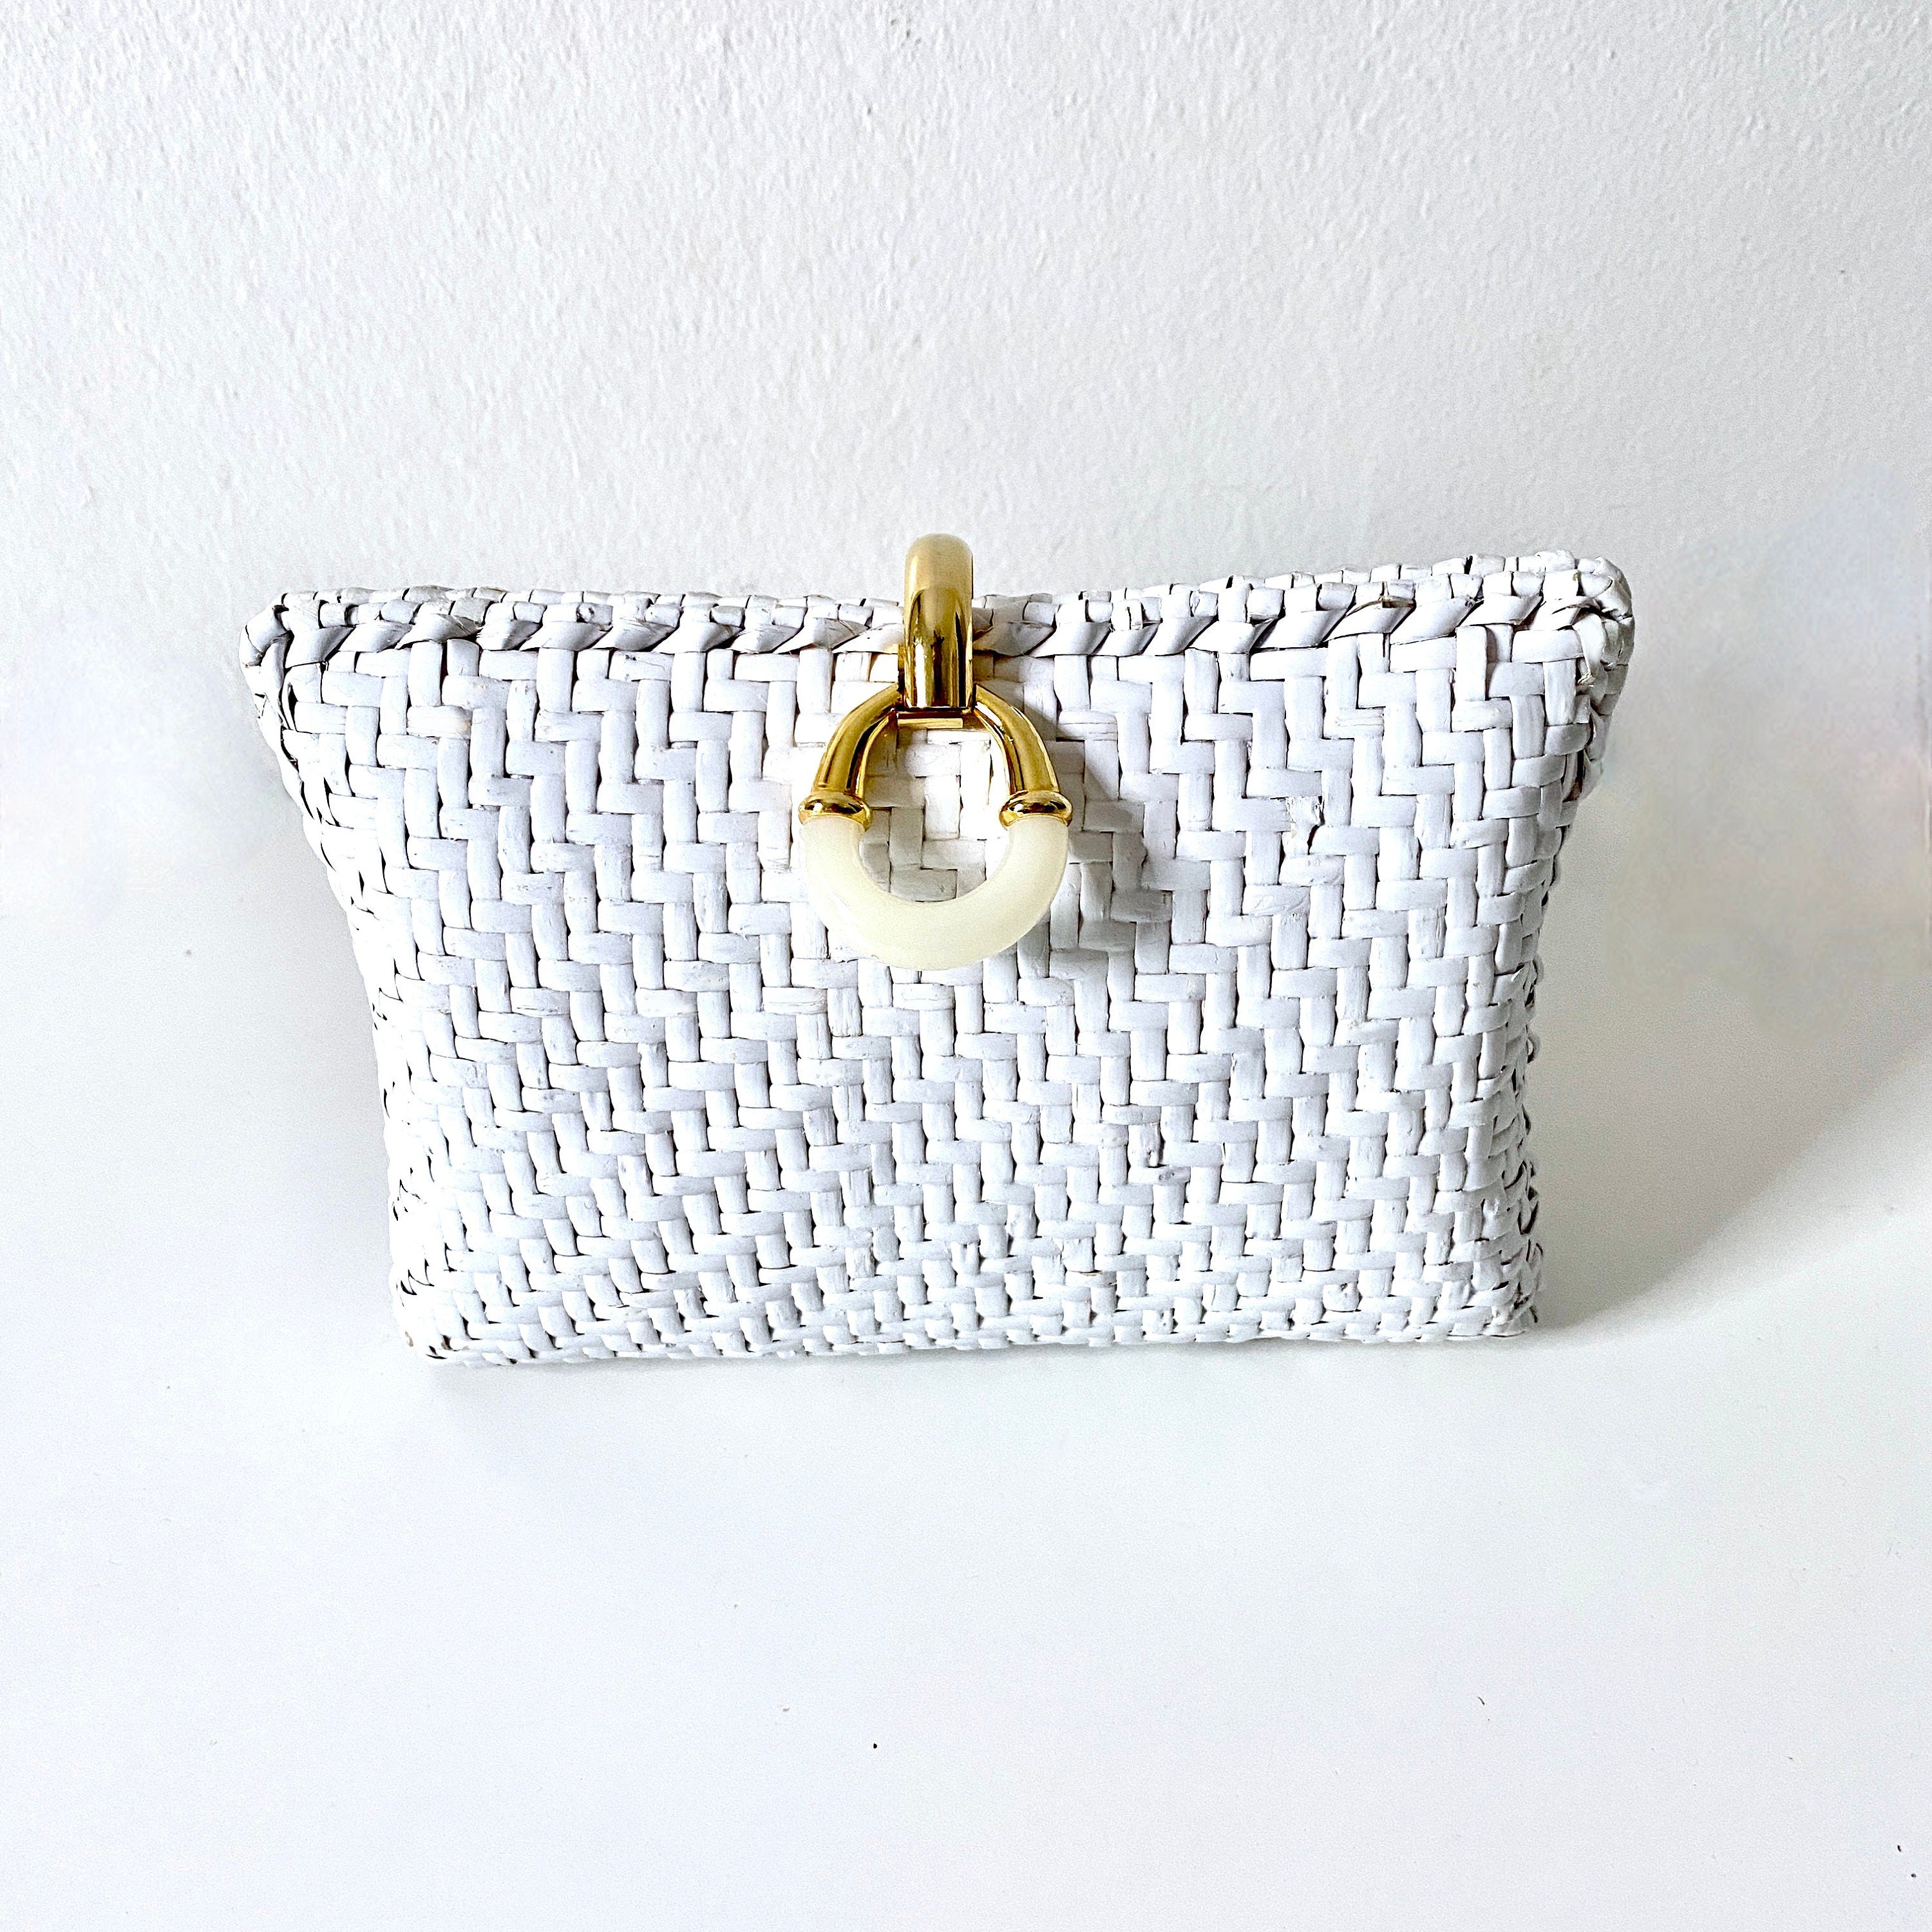 Adele Vintage Wicker Purse With Lucite and Gold Tone Accents - Etsy